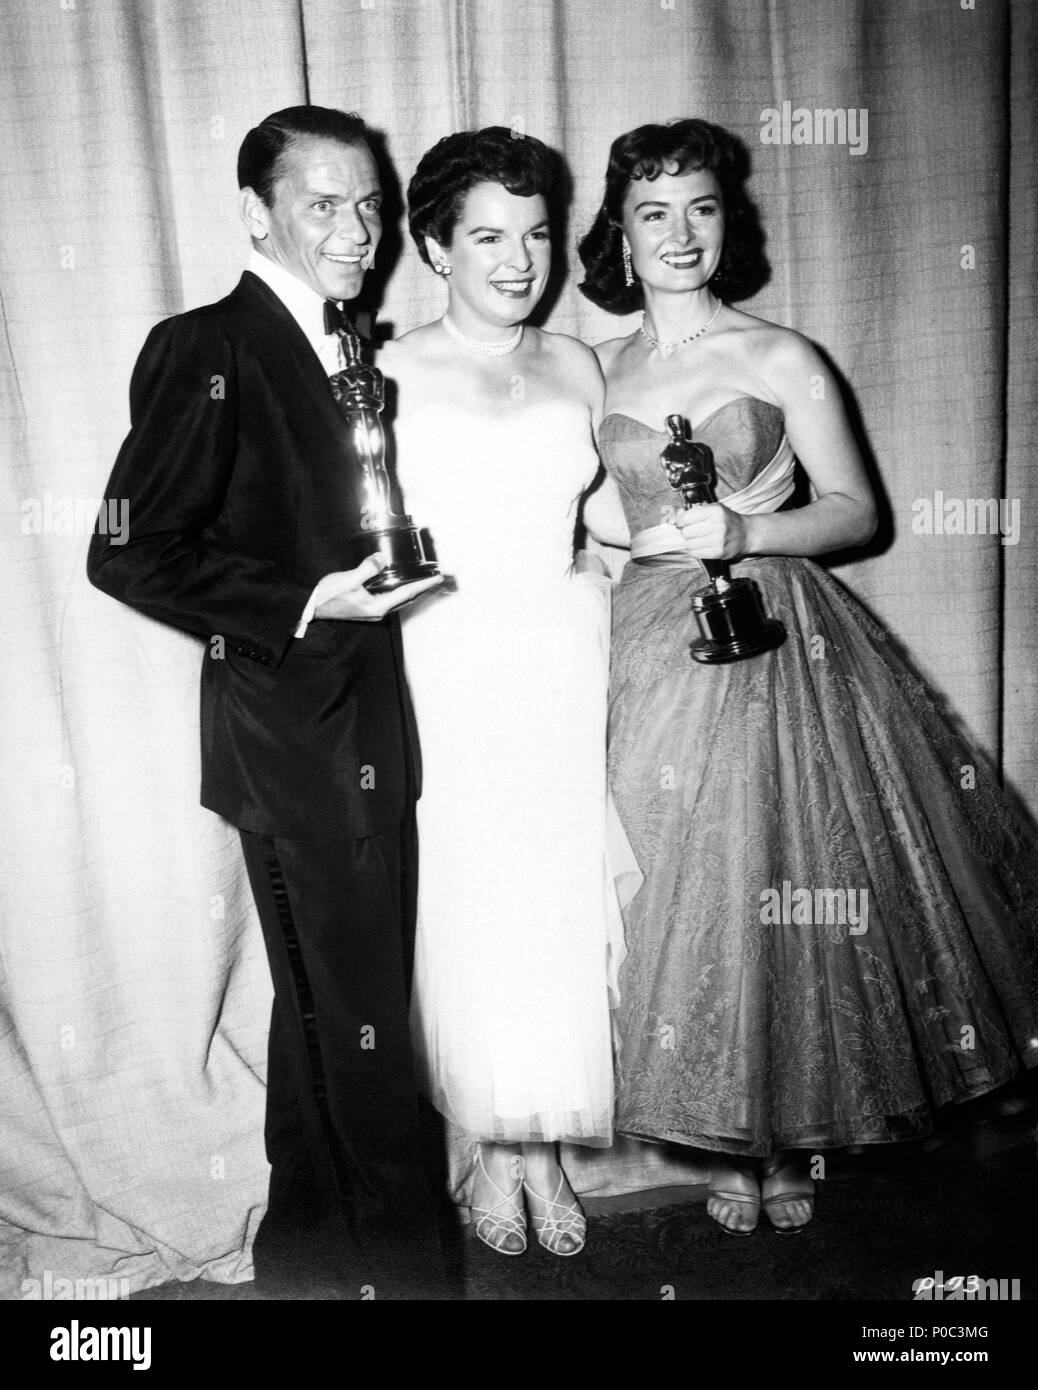 Description: 26th Annual Academy Awards (1954). Fran Sinatra, best actor in a supporting role for 'Fom Here to Eternety'. Donna Redd, best actress in a supporting role for 'From Here to Eternety'. Mercedes McCambridge accompanies them..  Year: 1954.  Stars: MERCEDES MCCAMBRIDGE; DONNA REED; FRANK SINATRA. Stock Photo